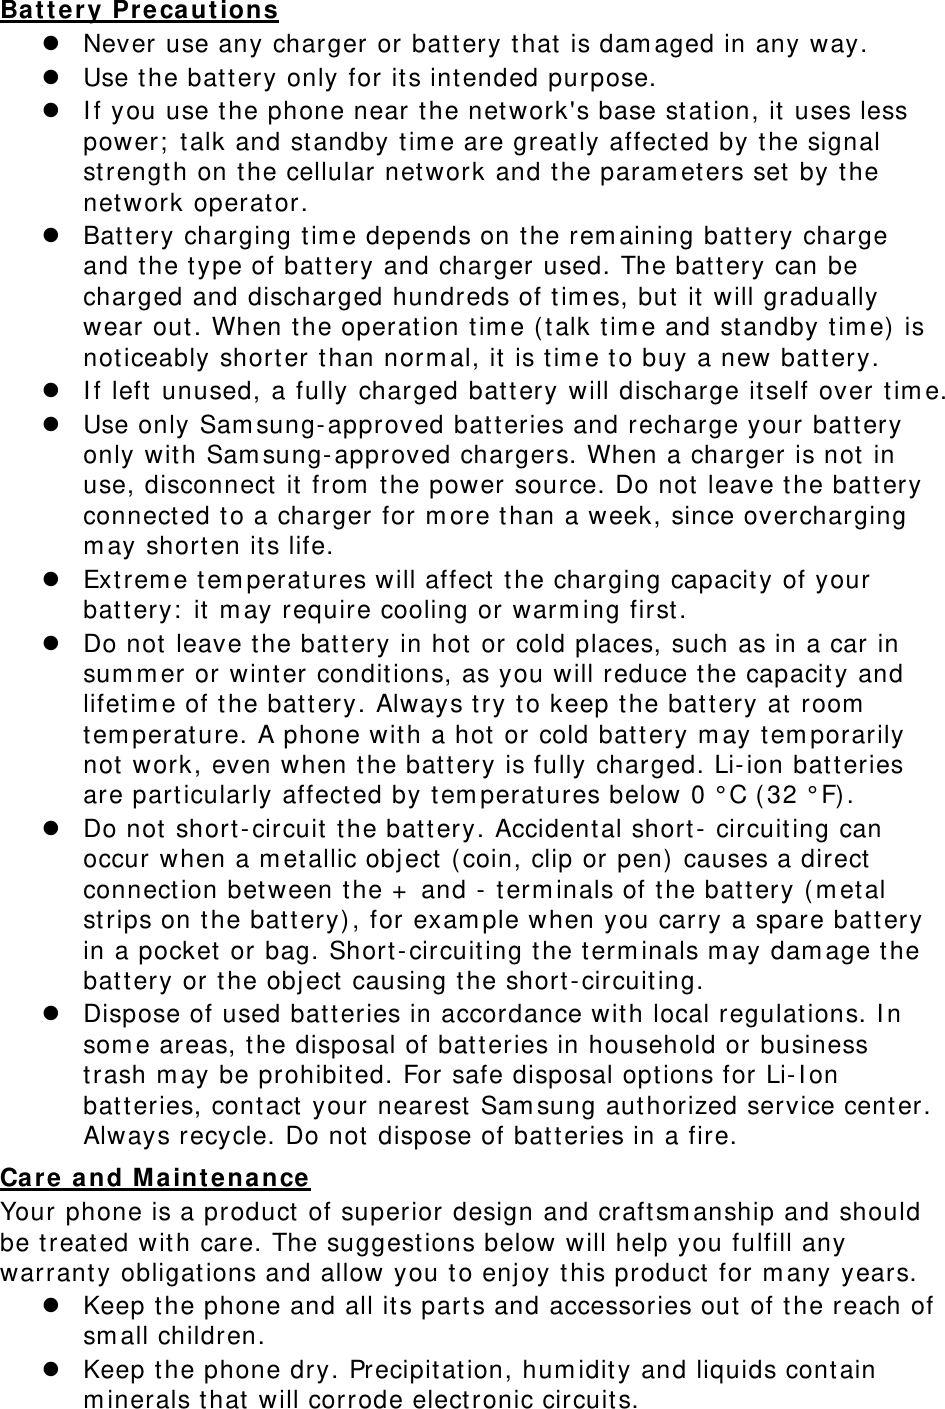 Battery Precautions  Never use any charger or battery that is damaged in any way.  Use the battery only for its intended purpose.  If you use the phone near the network&apos;s base station, it uses less power; talk and standby time are greatly affected by the signal strength on the cellular network and the parameters set by the network operator.  Battery charging time depends on the remaining battery charge and the type of battery and charger used. The battery can be charged and discharged hundreds of times, but it will gradually wear out. When the operation time (talk time and standby time) is noticeably shorter than normal, it is time to buy a new battery.  If left unused, a fully charged battery will discharge itself over time.  Use only Samsung-approved batteries and recharge your battery only with Samsung-approved chargers. When a charger is not in use, disconnect it from the power source. Do not leave the battery connected to a charger for more than a week, since overcharging may shorten its life.  Extreme temperatures will affect the charging capacity of your battery: it may require cooling or warming first.  Do not leave the battery in hot or cold places, such as in a car in summer or winter conditions, as you will reduce the capacity and lifetime of the battery. Always try to keep the battery at room temperature. A phone with a hot or cold battery may temporarily not work, even when the battery is fully charged. Li-ion batteries are particularly affected by temperatures below 0 °C (32 °F).  Do not short-circuit the battery. Accidental short- circuiting can occur when a metallic object (coin, clip or pen) causes a direct connection between the + and - terminals of the battery (metal strips on the battery), for example when you carry a spare battery in a pocket or bag. Short-circuiting the terminals may damage the battery or the object causing the short-circuiting.  Dispose of used batteries in accordance with local regulations. In some areas, the disposal of batteries in household or business trash may be prohibited. For safe disposal options for Li-Ion batteries, contact your nearest Samsung authorized service center. Always recycle. Do not dispose of batteries in a fire. Care and Maintenance Your phone is a product of superior design and craftsmanship and should be treated with care. The suggestions below will help you fulfill any warranty obligations and allow you to enjoy this product for many years.  Keep the phone and all its parts and accessories out of the reach of small children.  Keep the phone dry. Precipitation, humidity and liquids contain minerals that will corrode electronic circuits. 